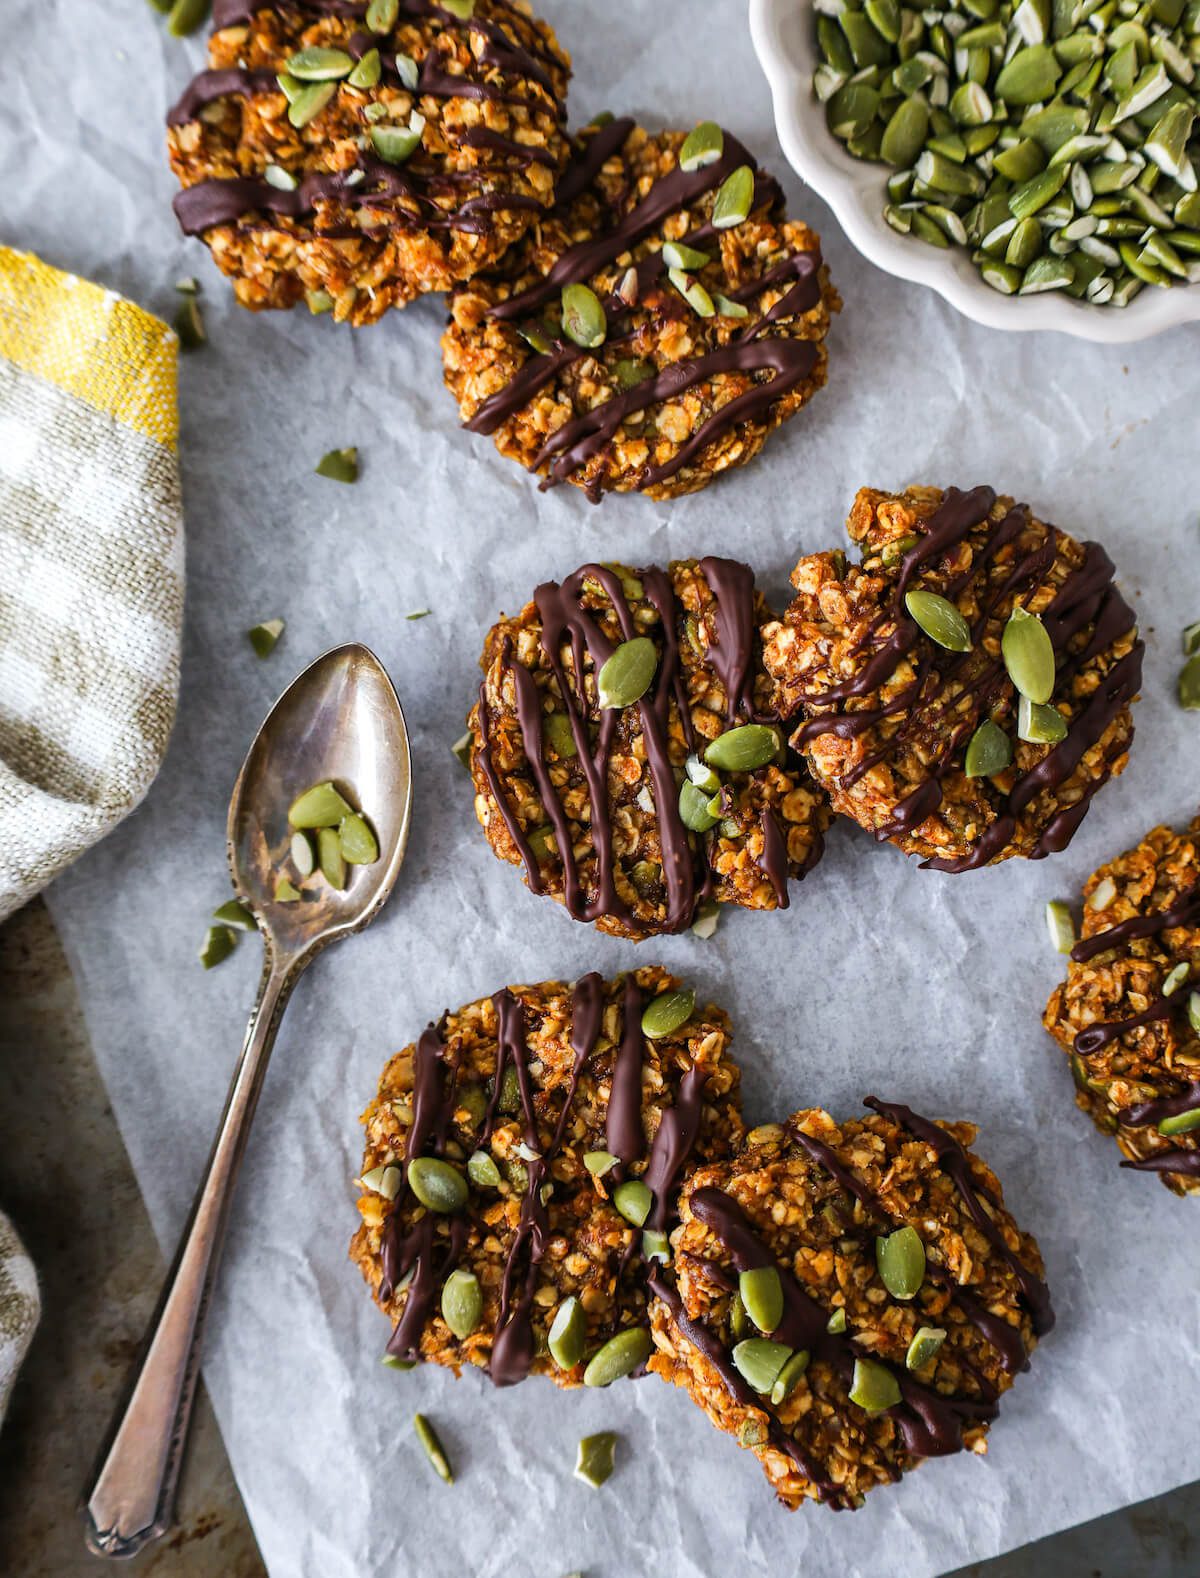 Seven small no bake pumpkin and oatmeal cookies drizzled with chocolate, on parchment, with a spoonfull of pepitas.